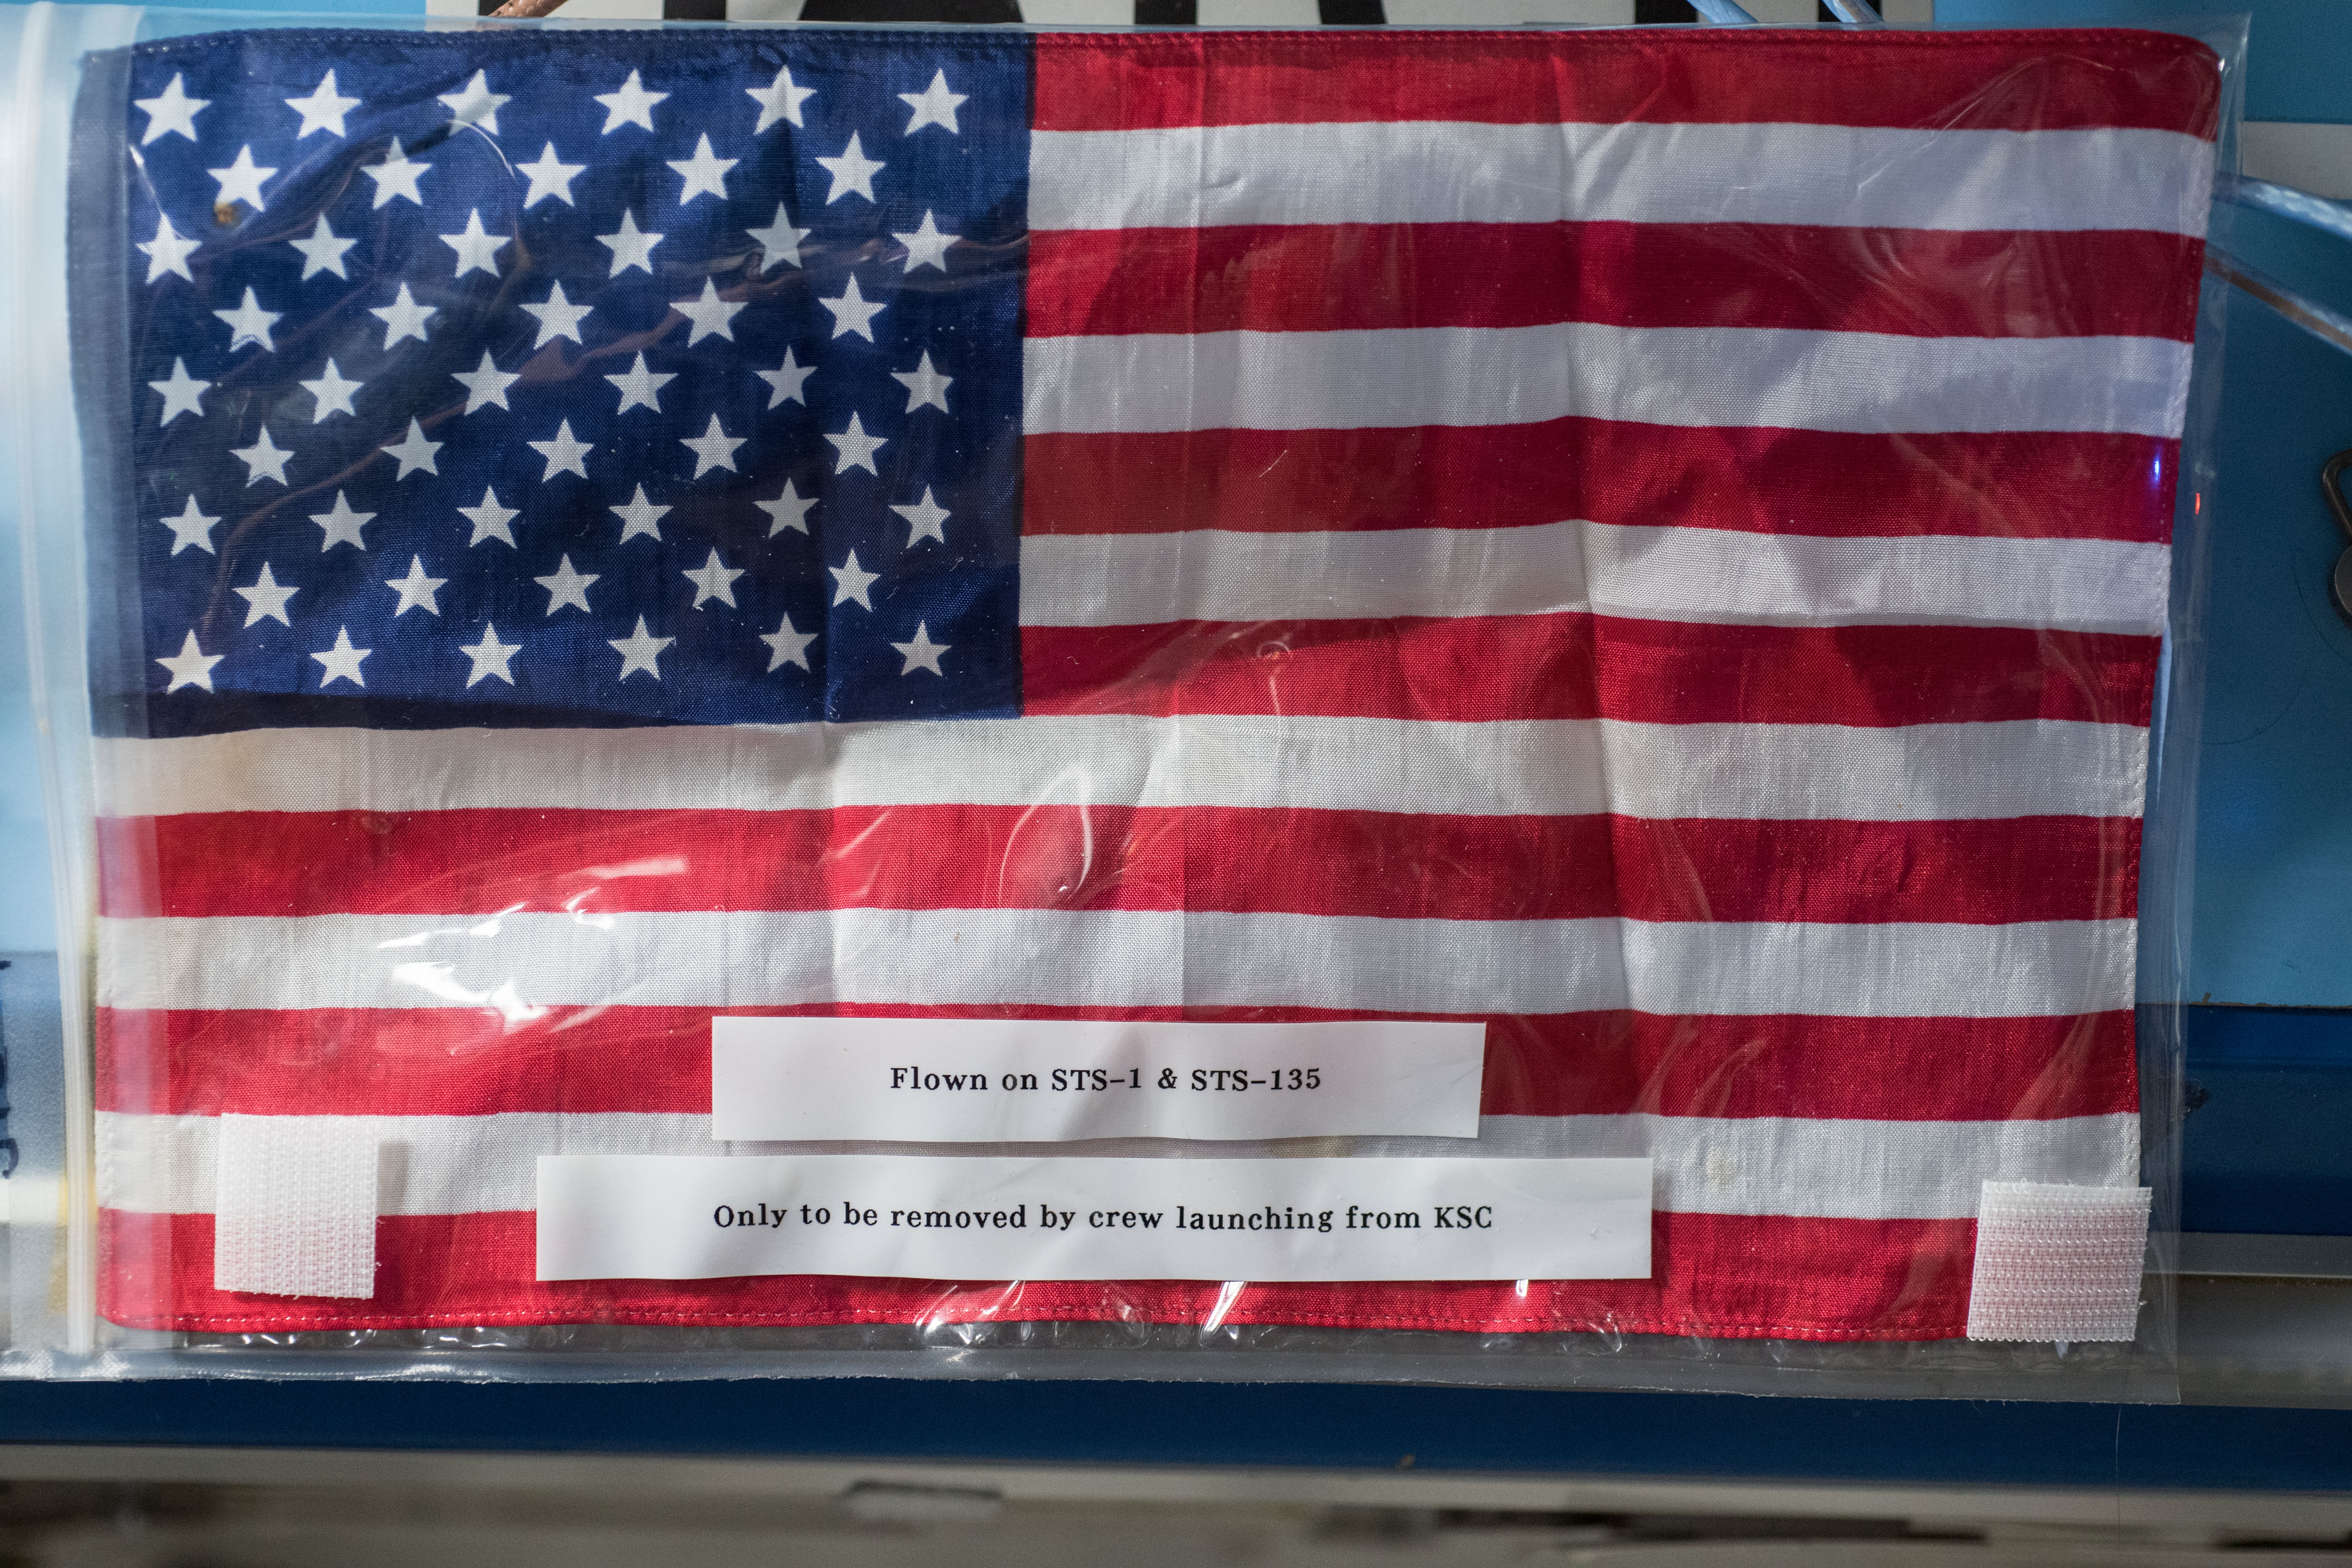 July 4, 2018. The Expedition 56 crew found the American flag originally flown aboard STS-1 and brought to the space station by STS-135